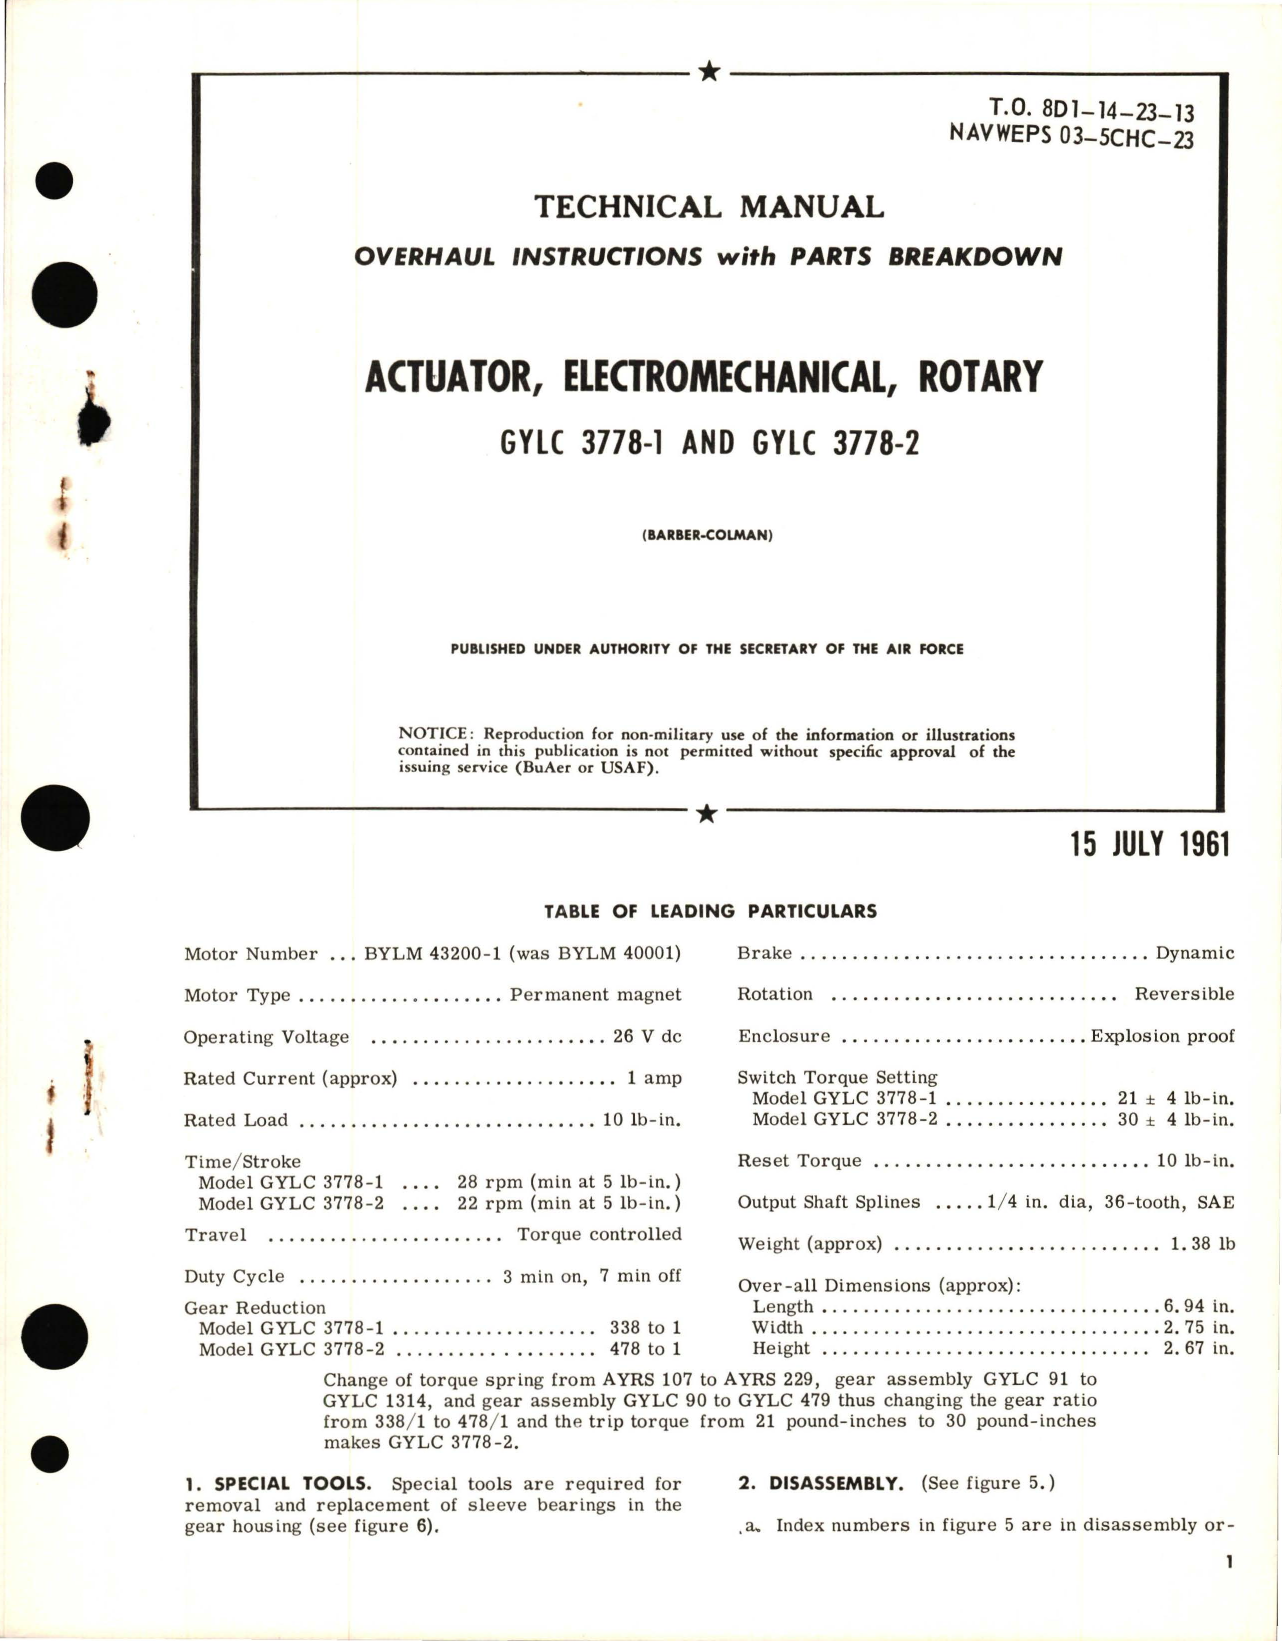 Sample page 1 from AirCorps Library document: Overhaul Instructions with Parts Breakdown for Electromechanical Rotary Actuator - GYLC 3778-1 and GYLC 3778-2 